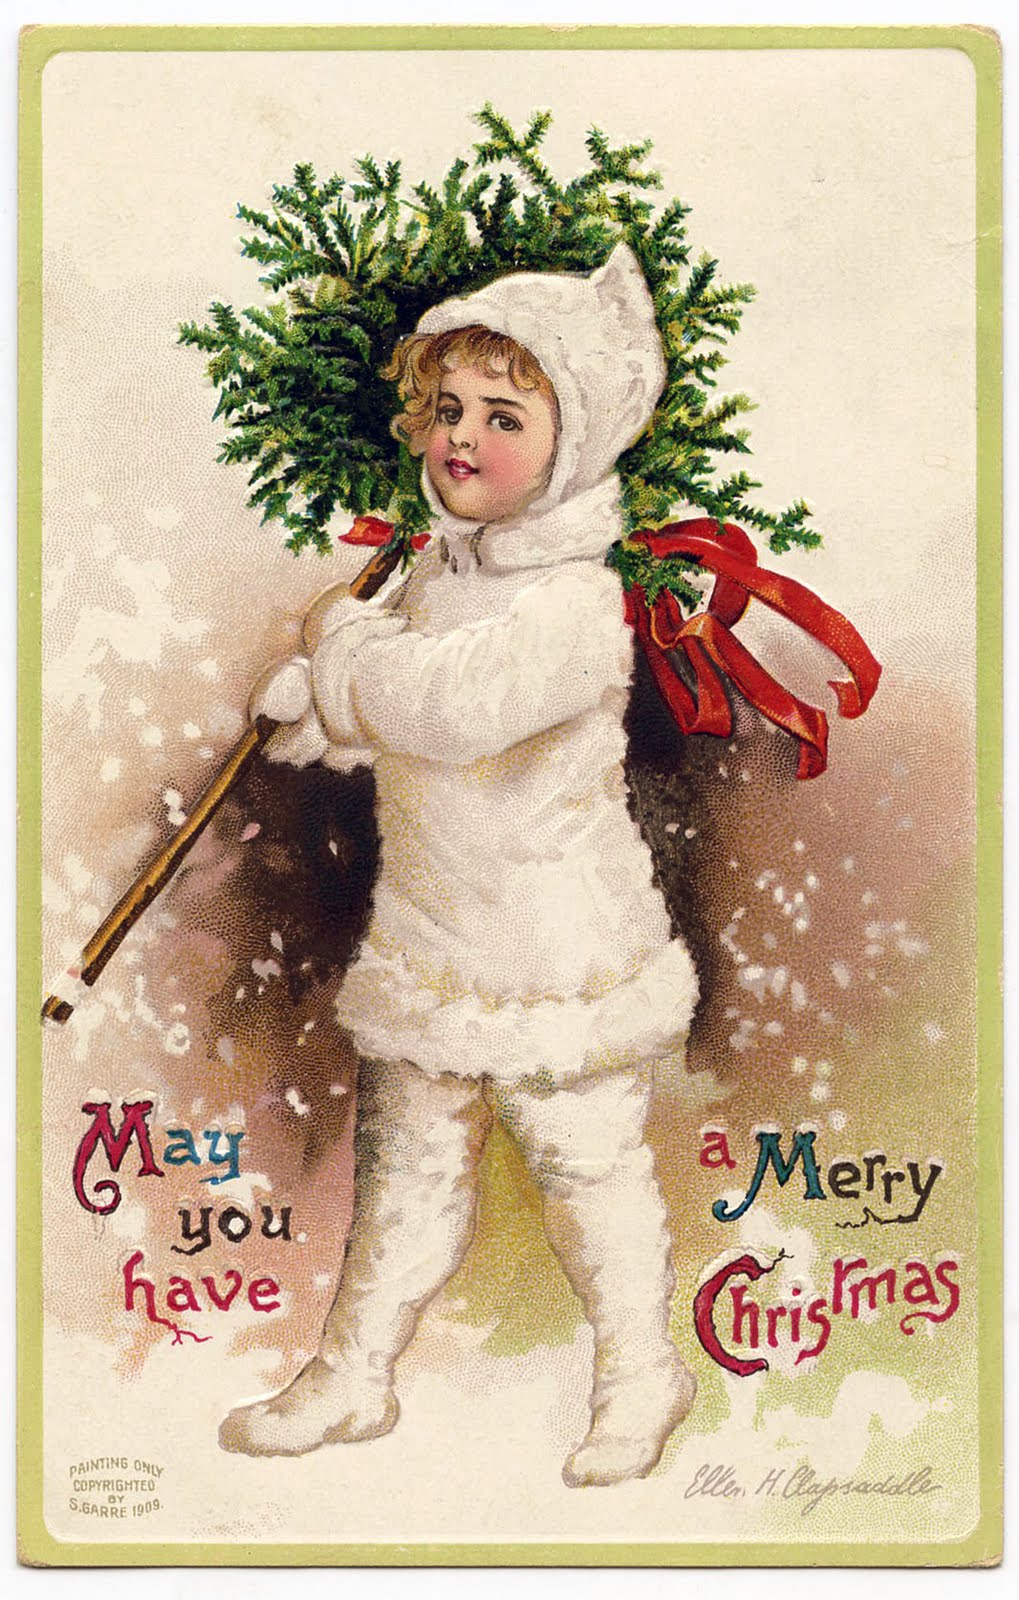 8 Merry Christmas Bell Images! - The Graphics Fairy